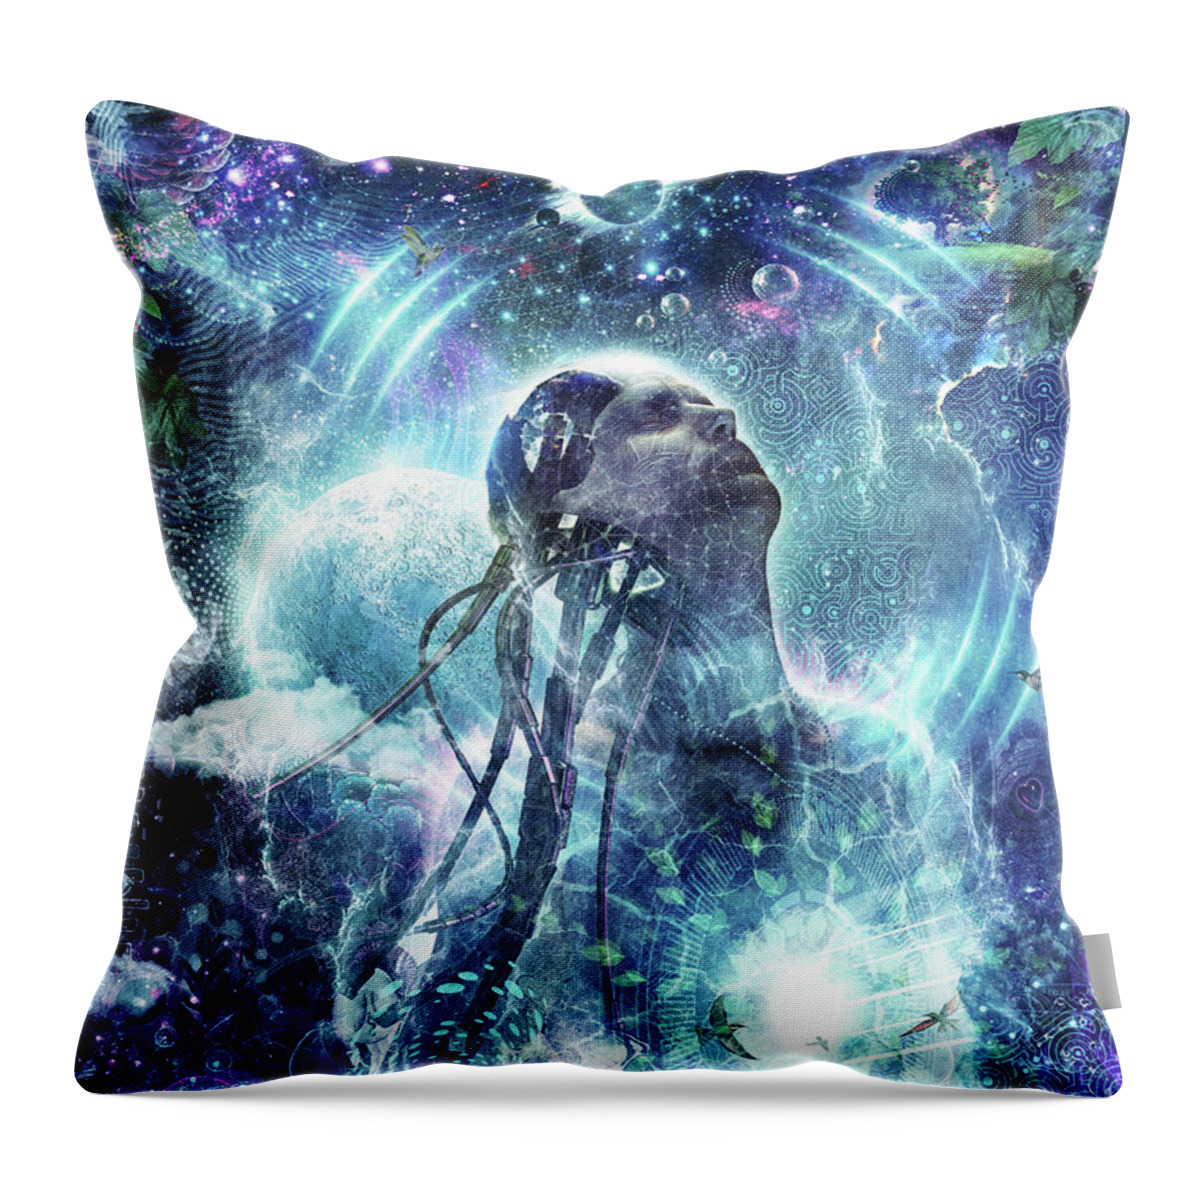 Blue Throw Pillow featuring the digital art Become The Light by Cameron Gray